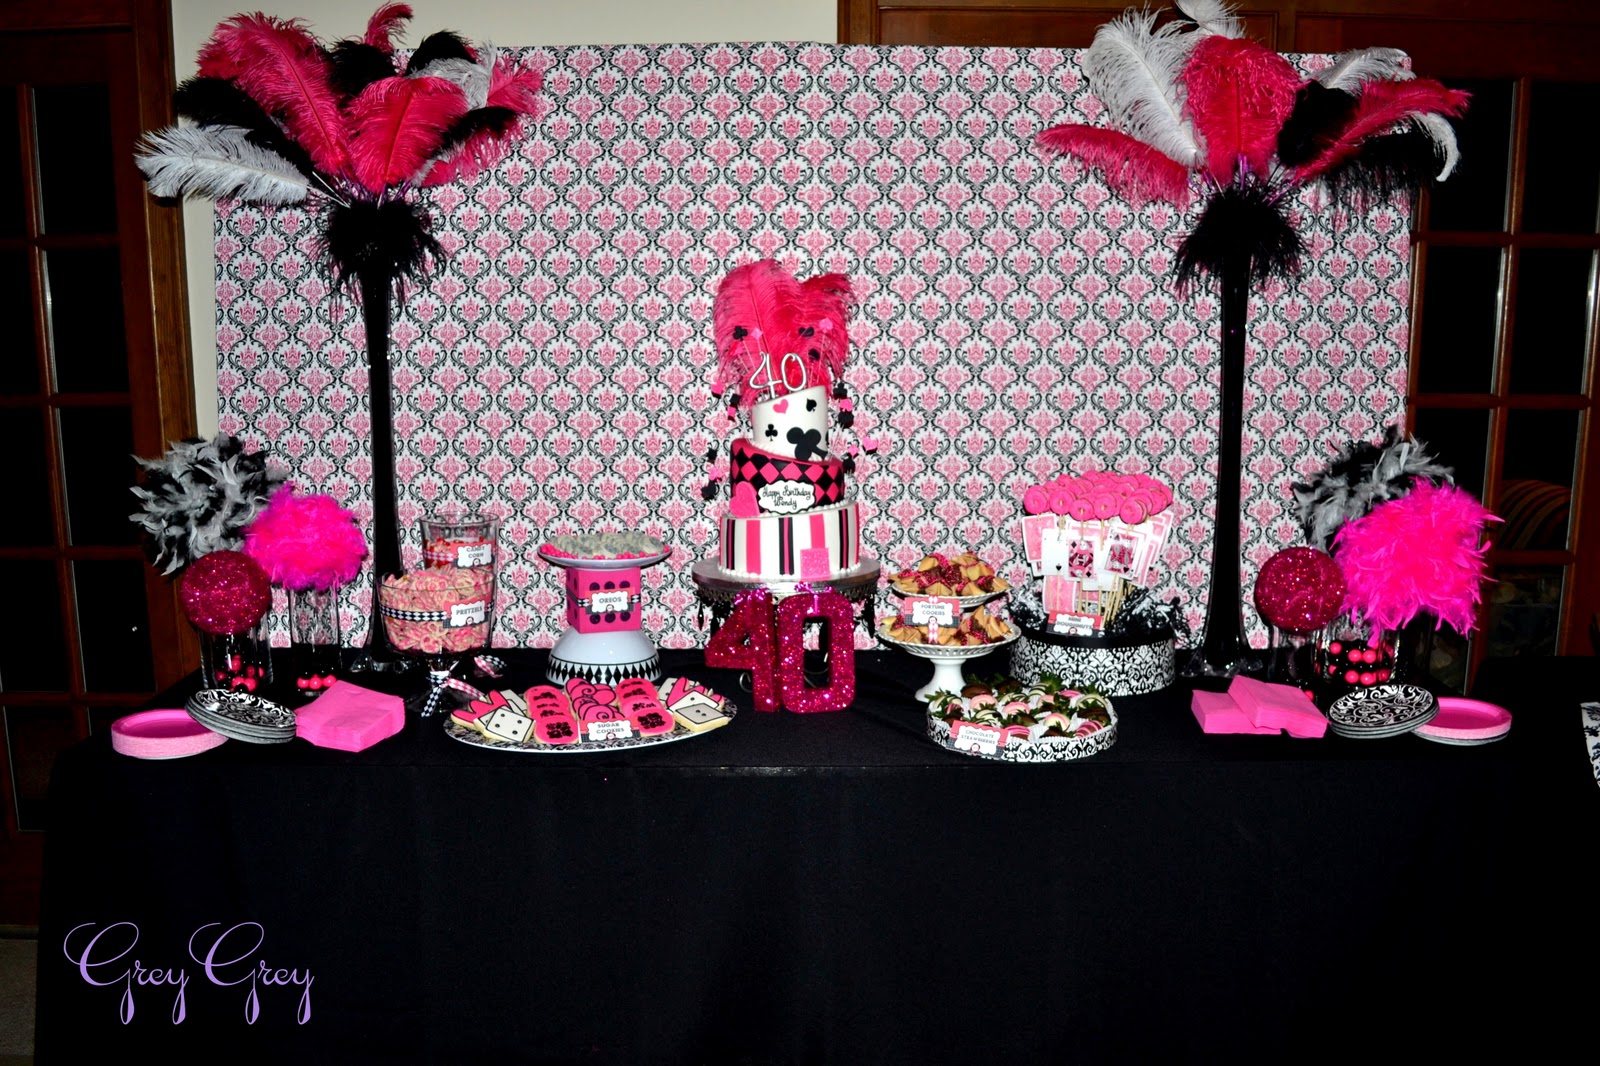  40th  Birthday  Party  Ideas  That Are Splendid for Your 